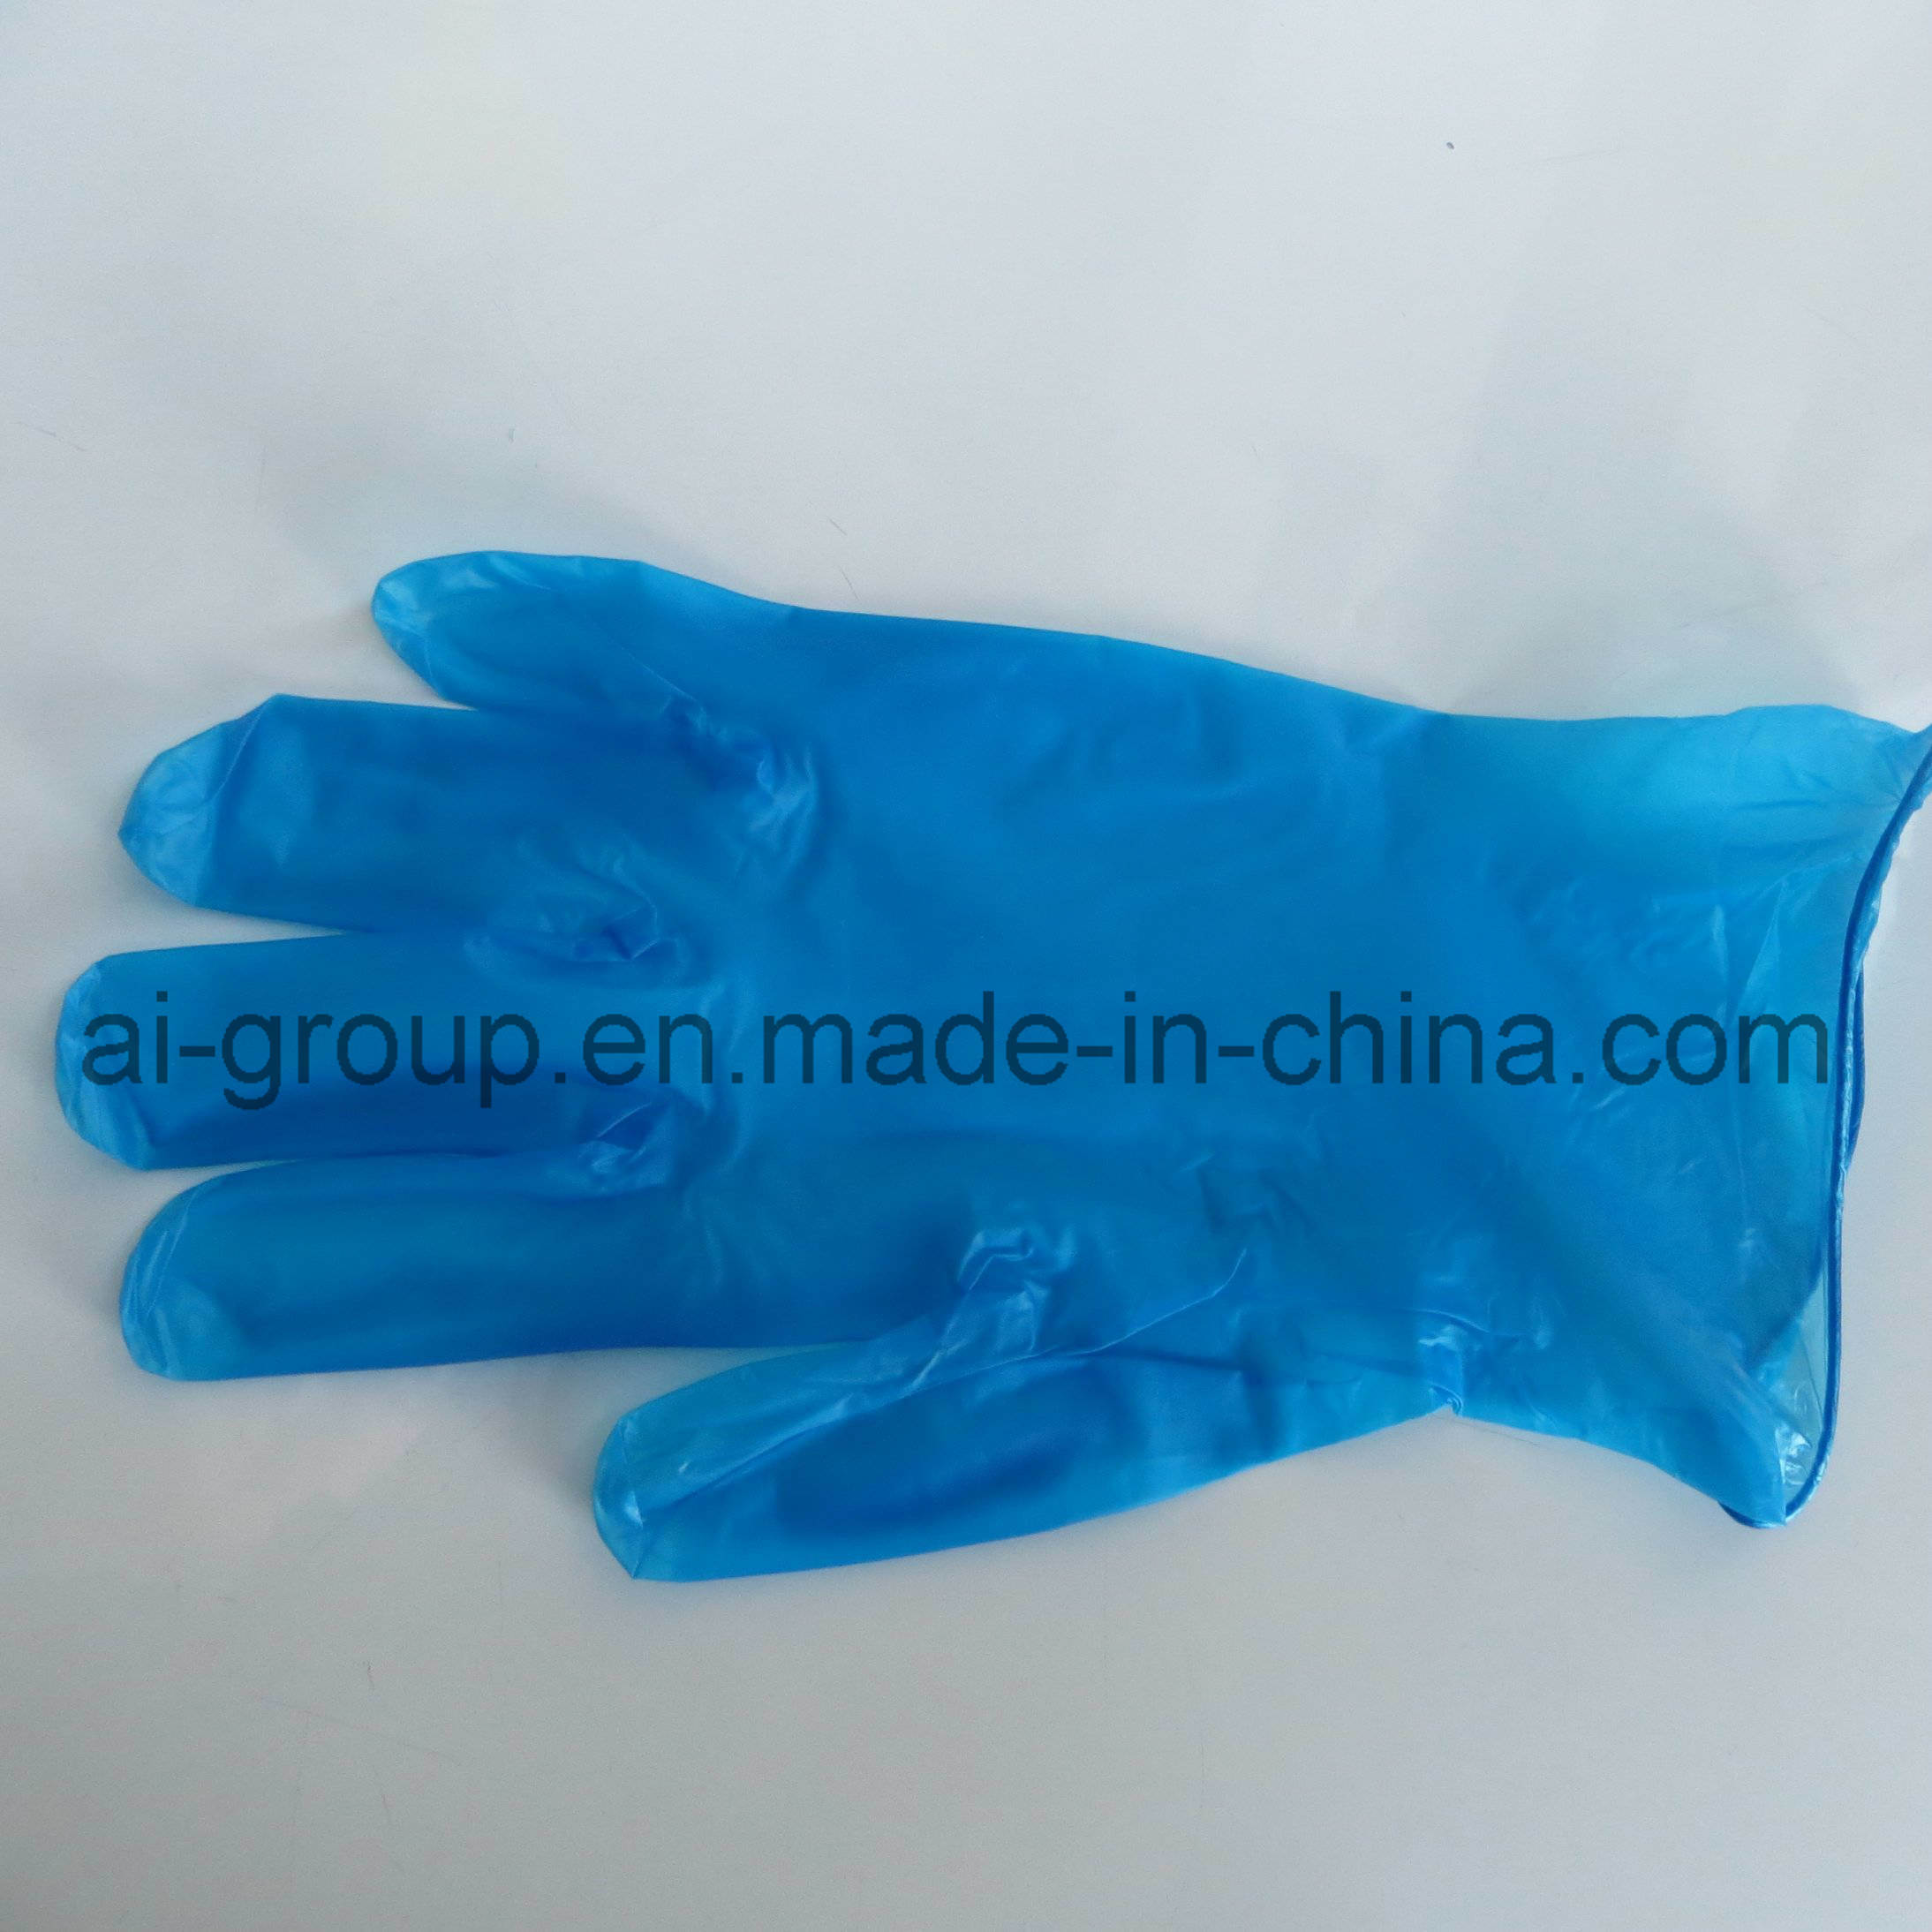 Disposable Powder Free Vinyl Gloves for Food Processing and General Purpose